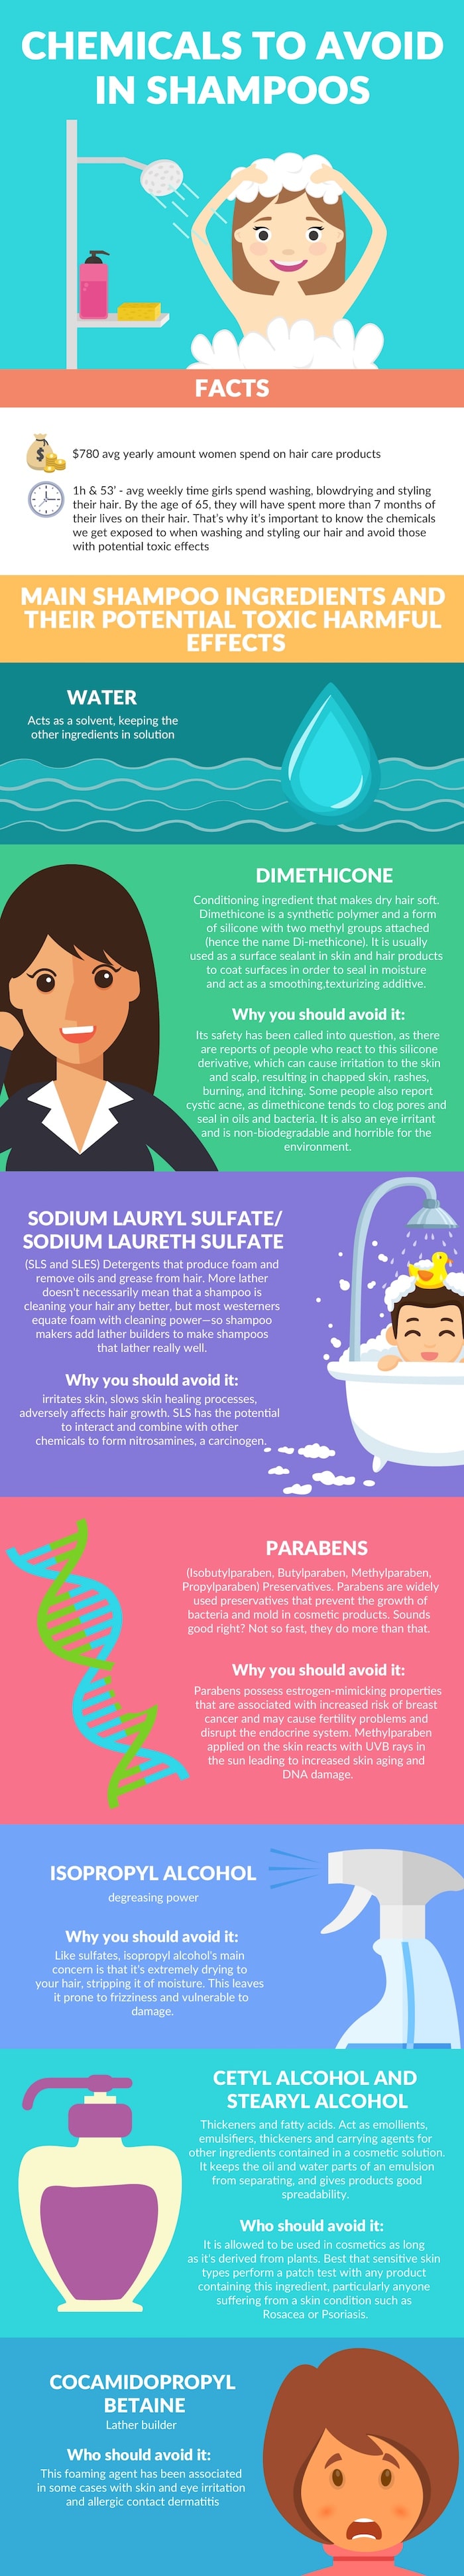 Chemicals to avoid in shampoos [Infographic]